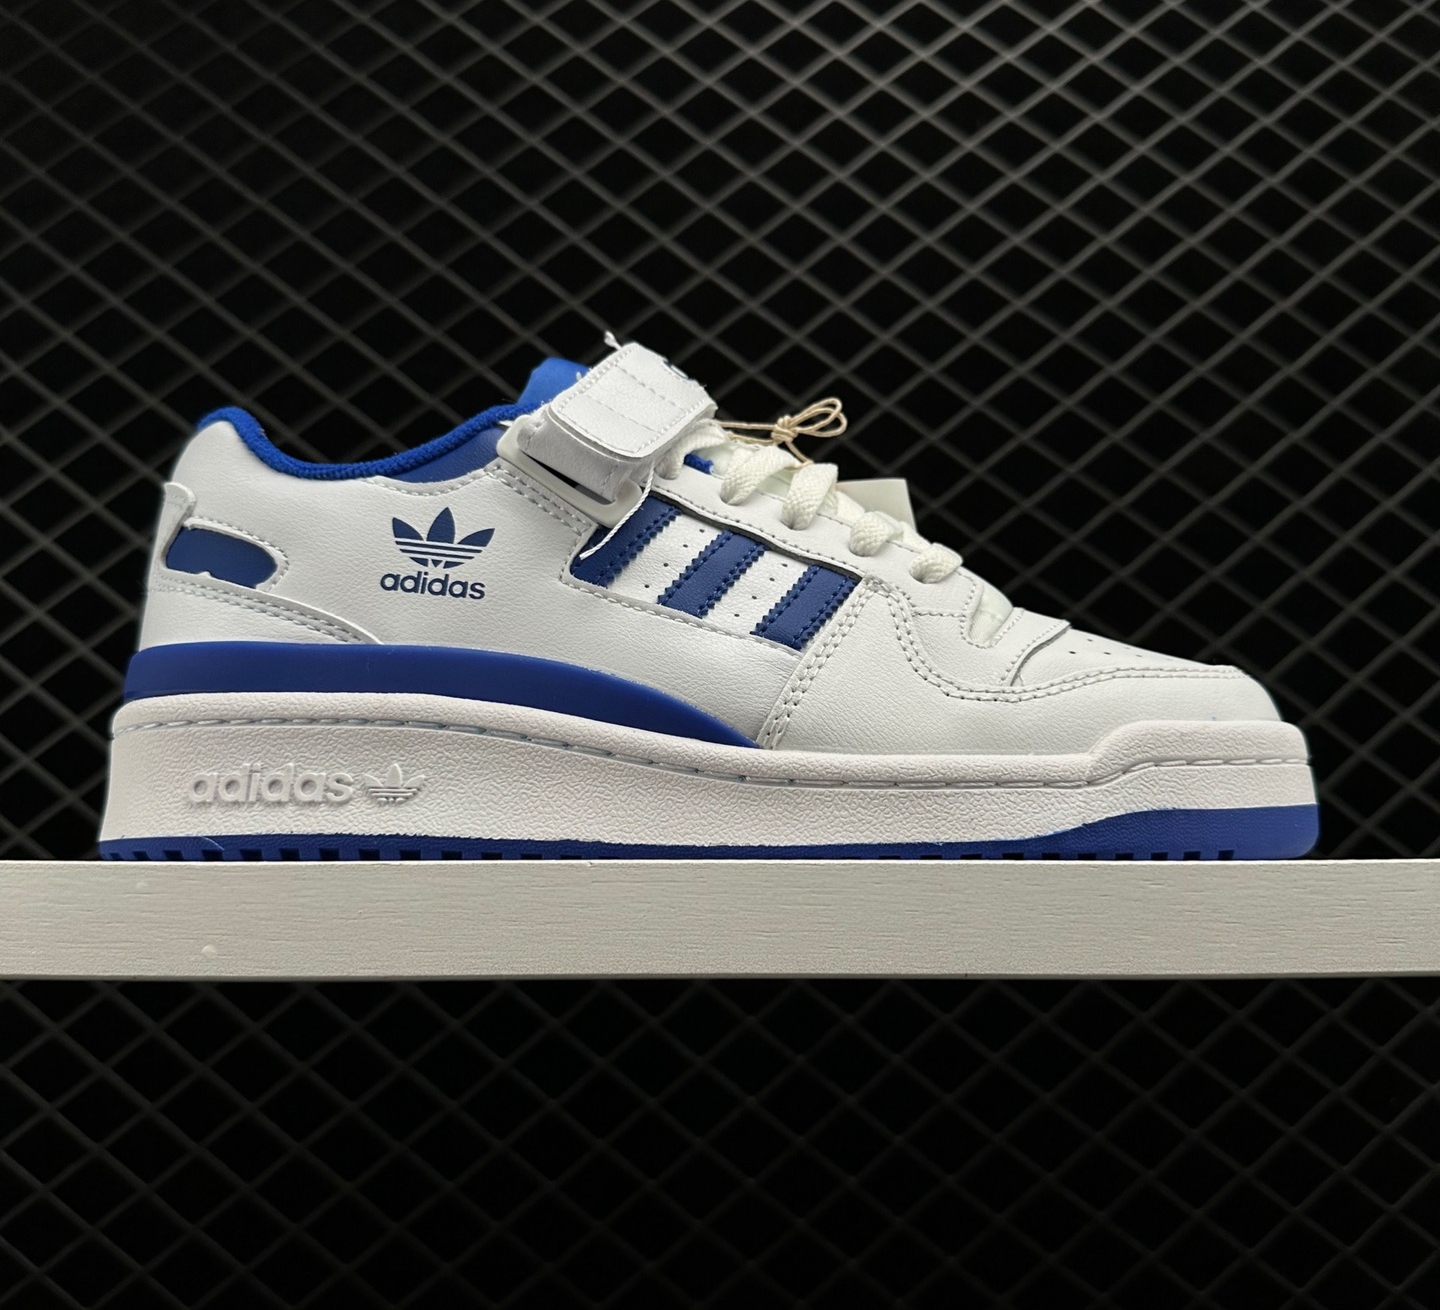 Adidas Forum Low 'White Royal Blue' FY7756 - Classic Style with a Modern Twist